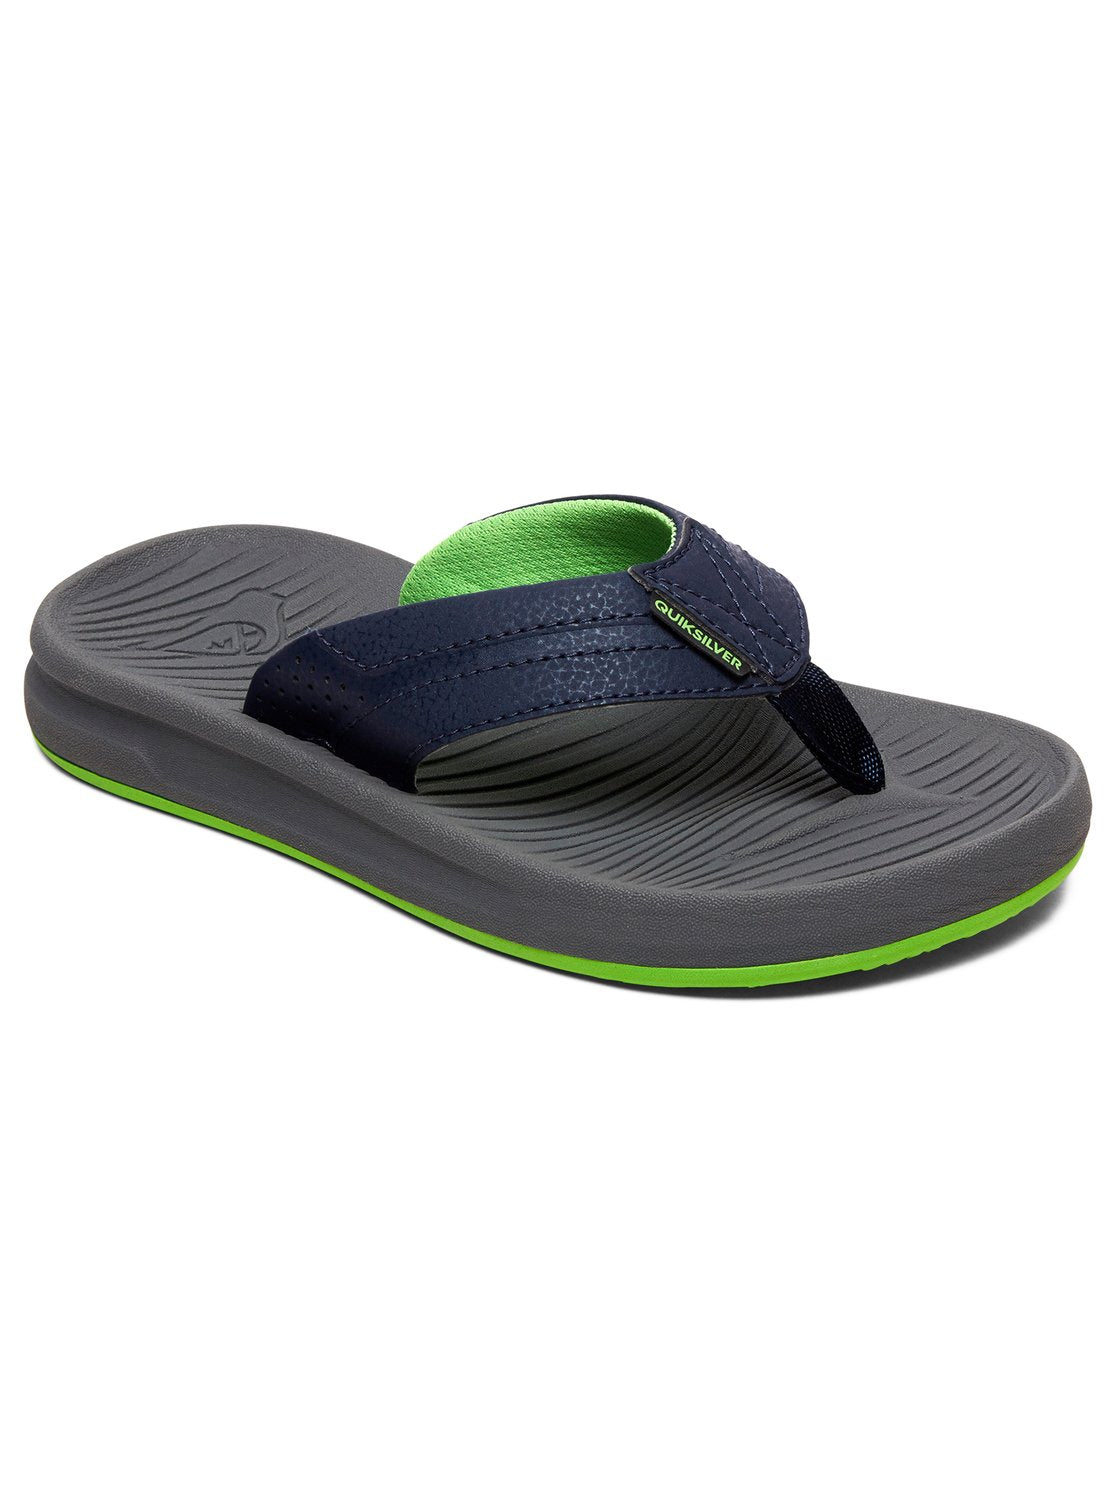 Quiksilver Oasis Youth Sandals XBSB-Blue-Grey-Blue 1 Y